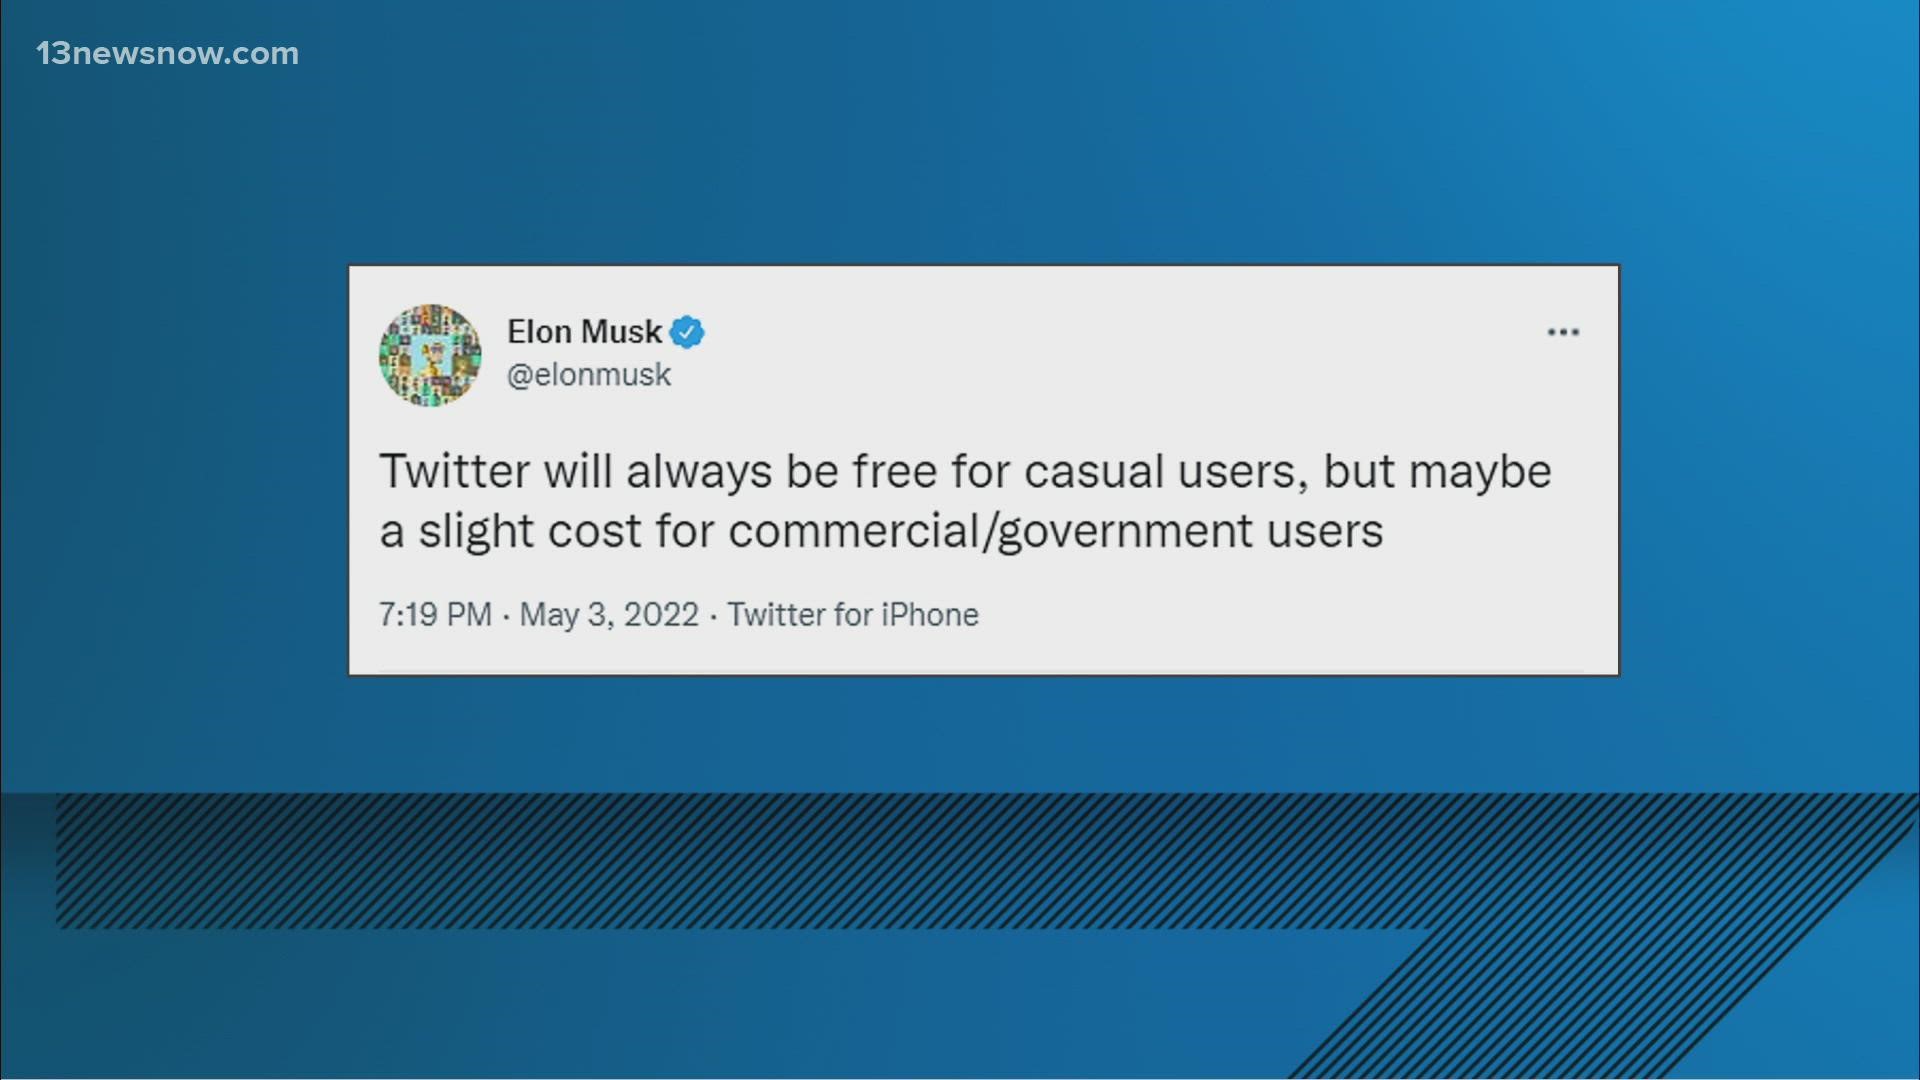 "Twitter will always be free for casual users, but maybe a slight cost for commercial/government users," the mogul tweeted.